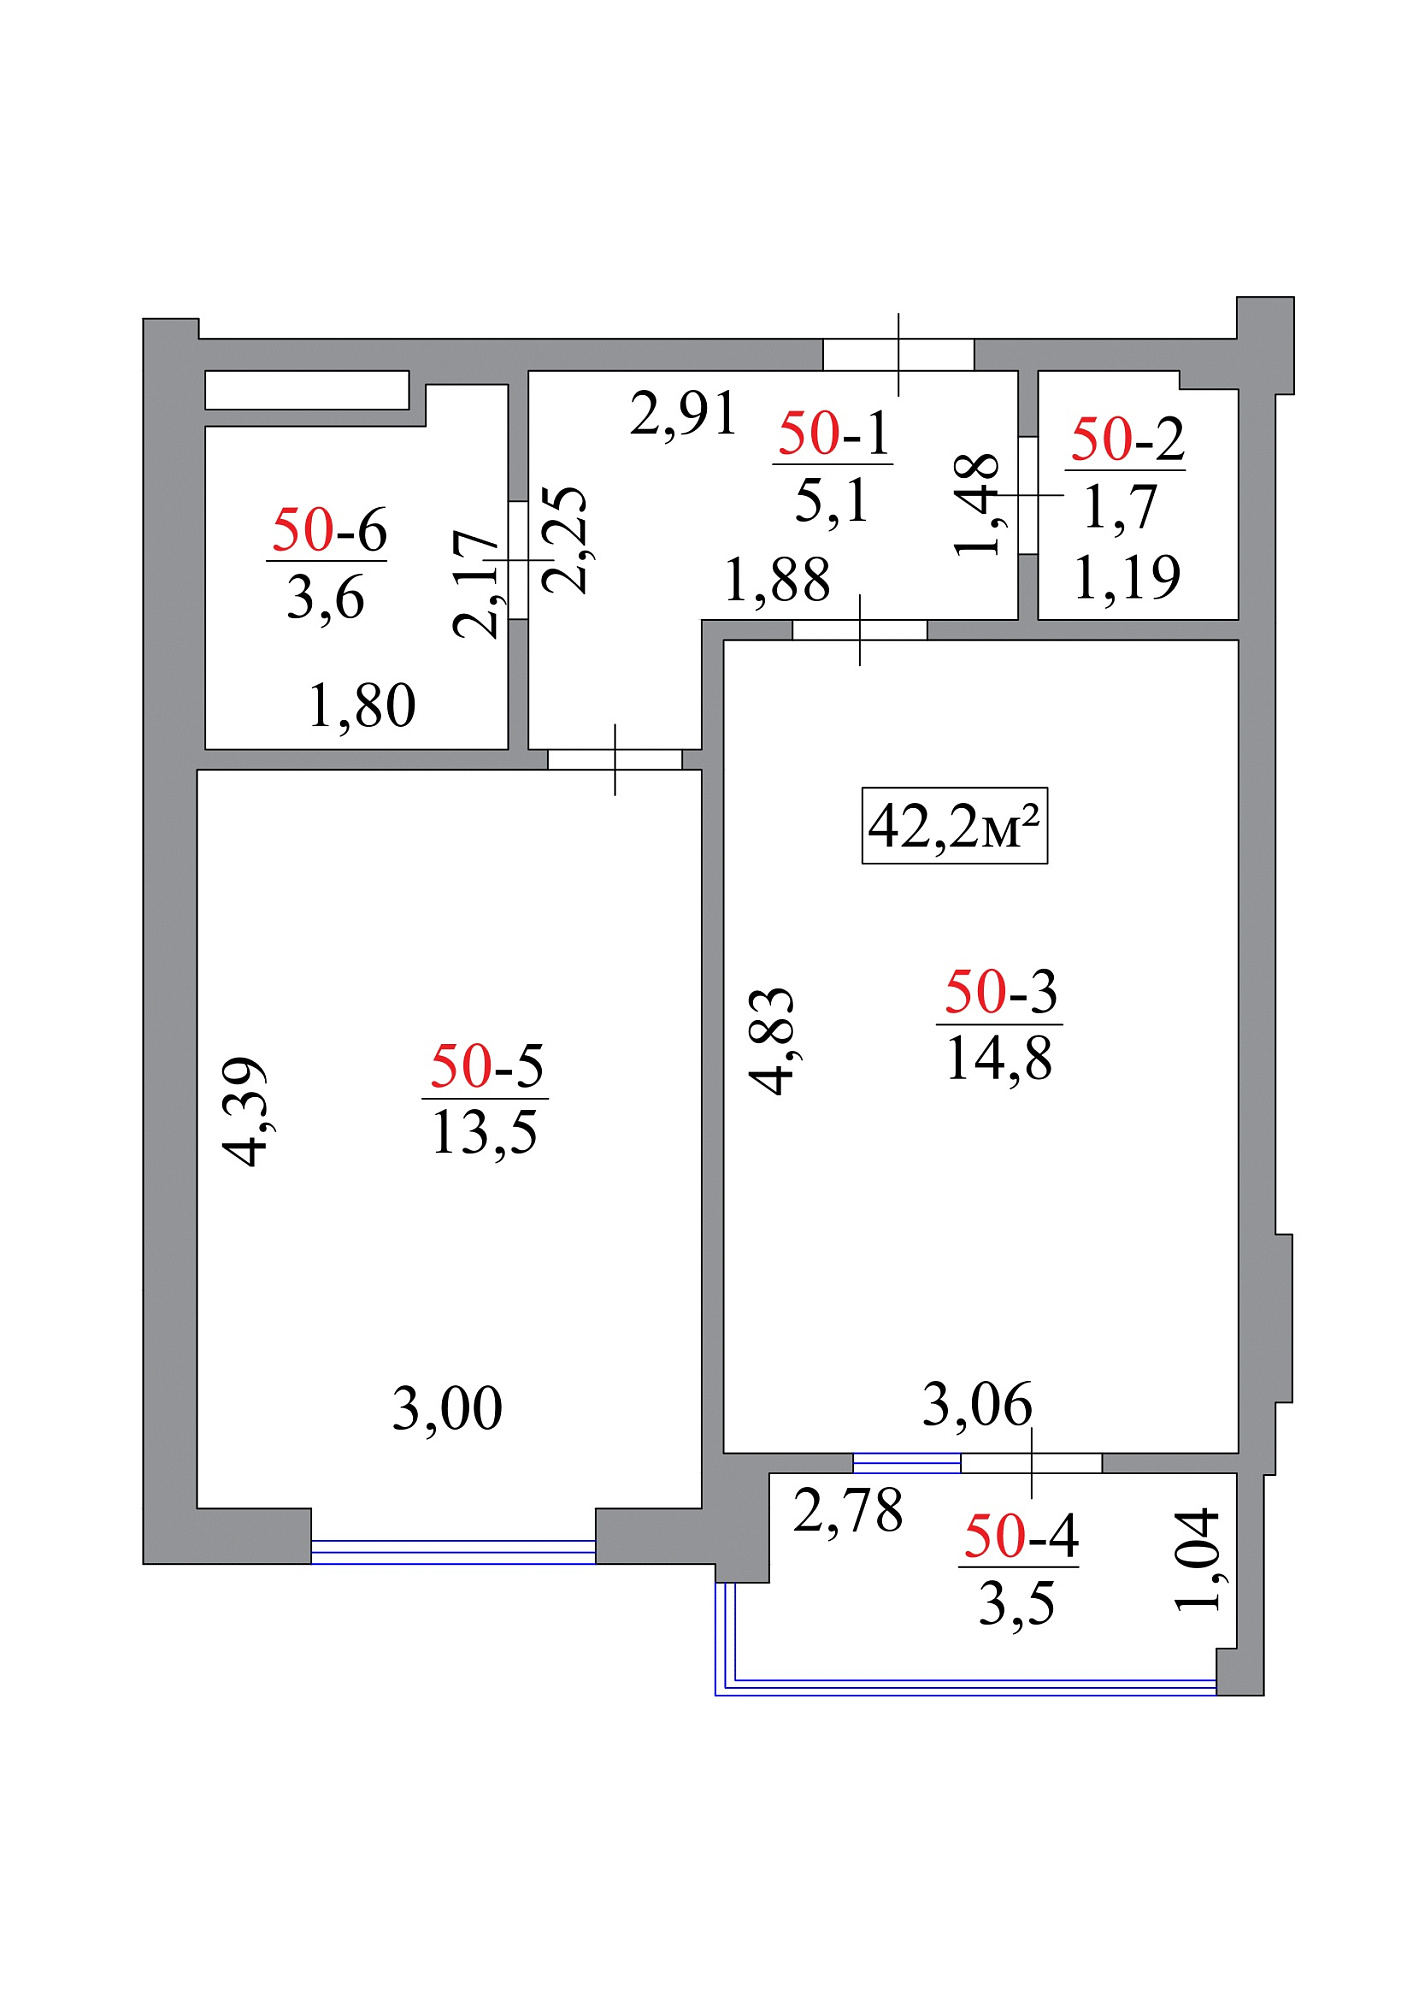 Planning 1-rm flats area 42.2m2, AB-07-05/00045.